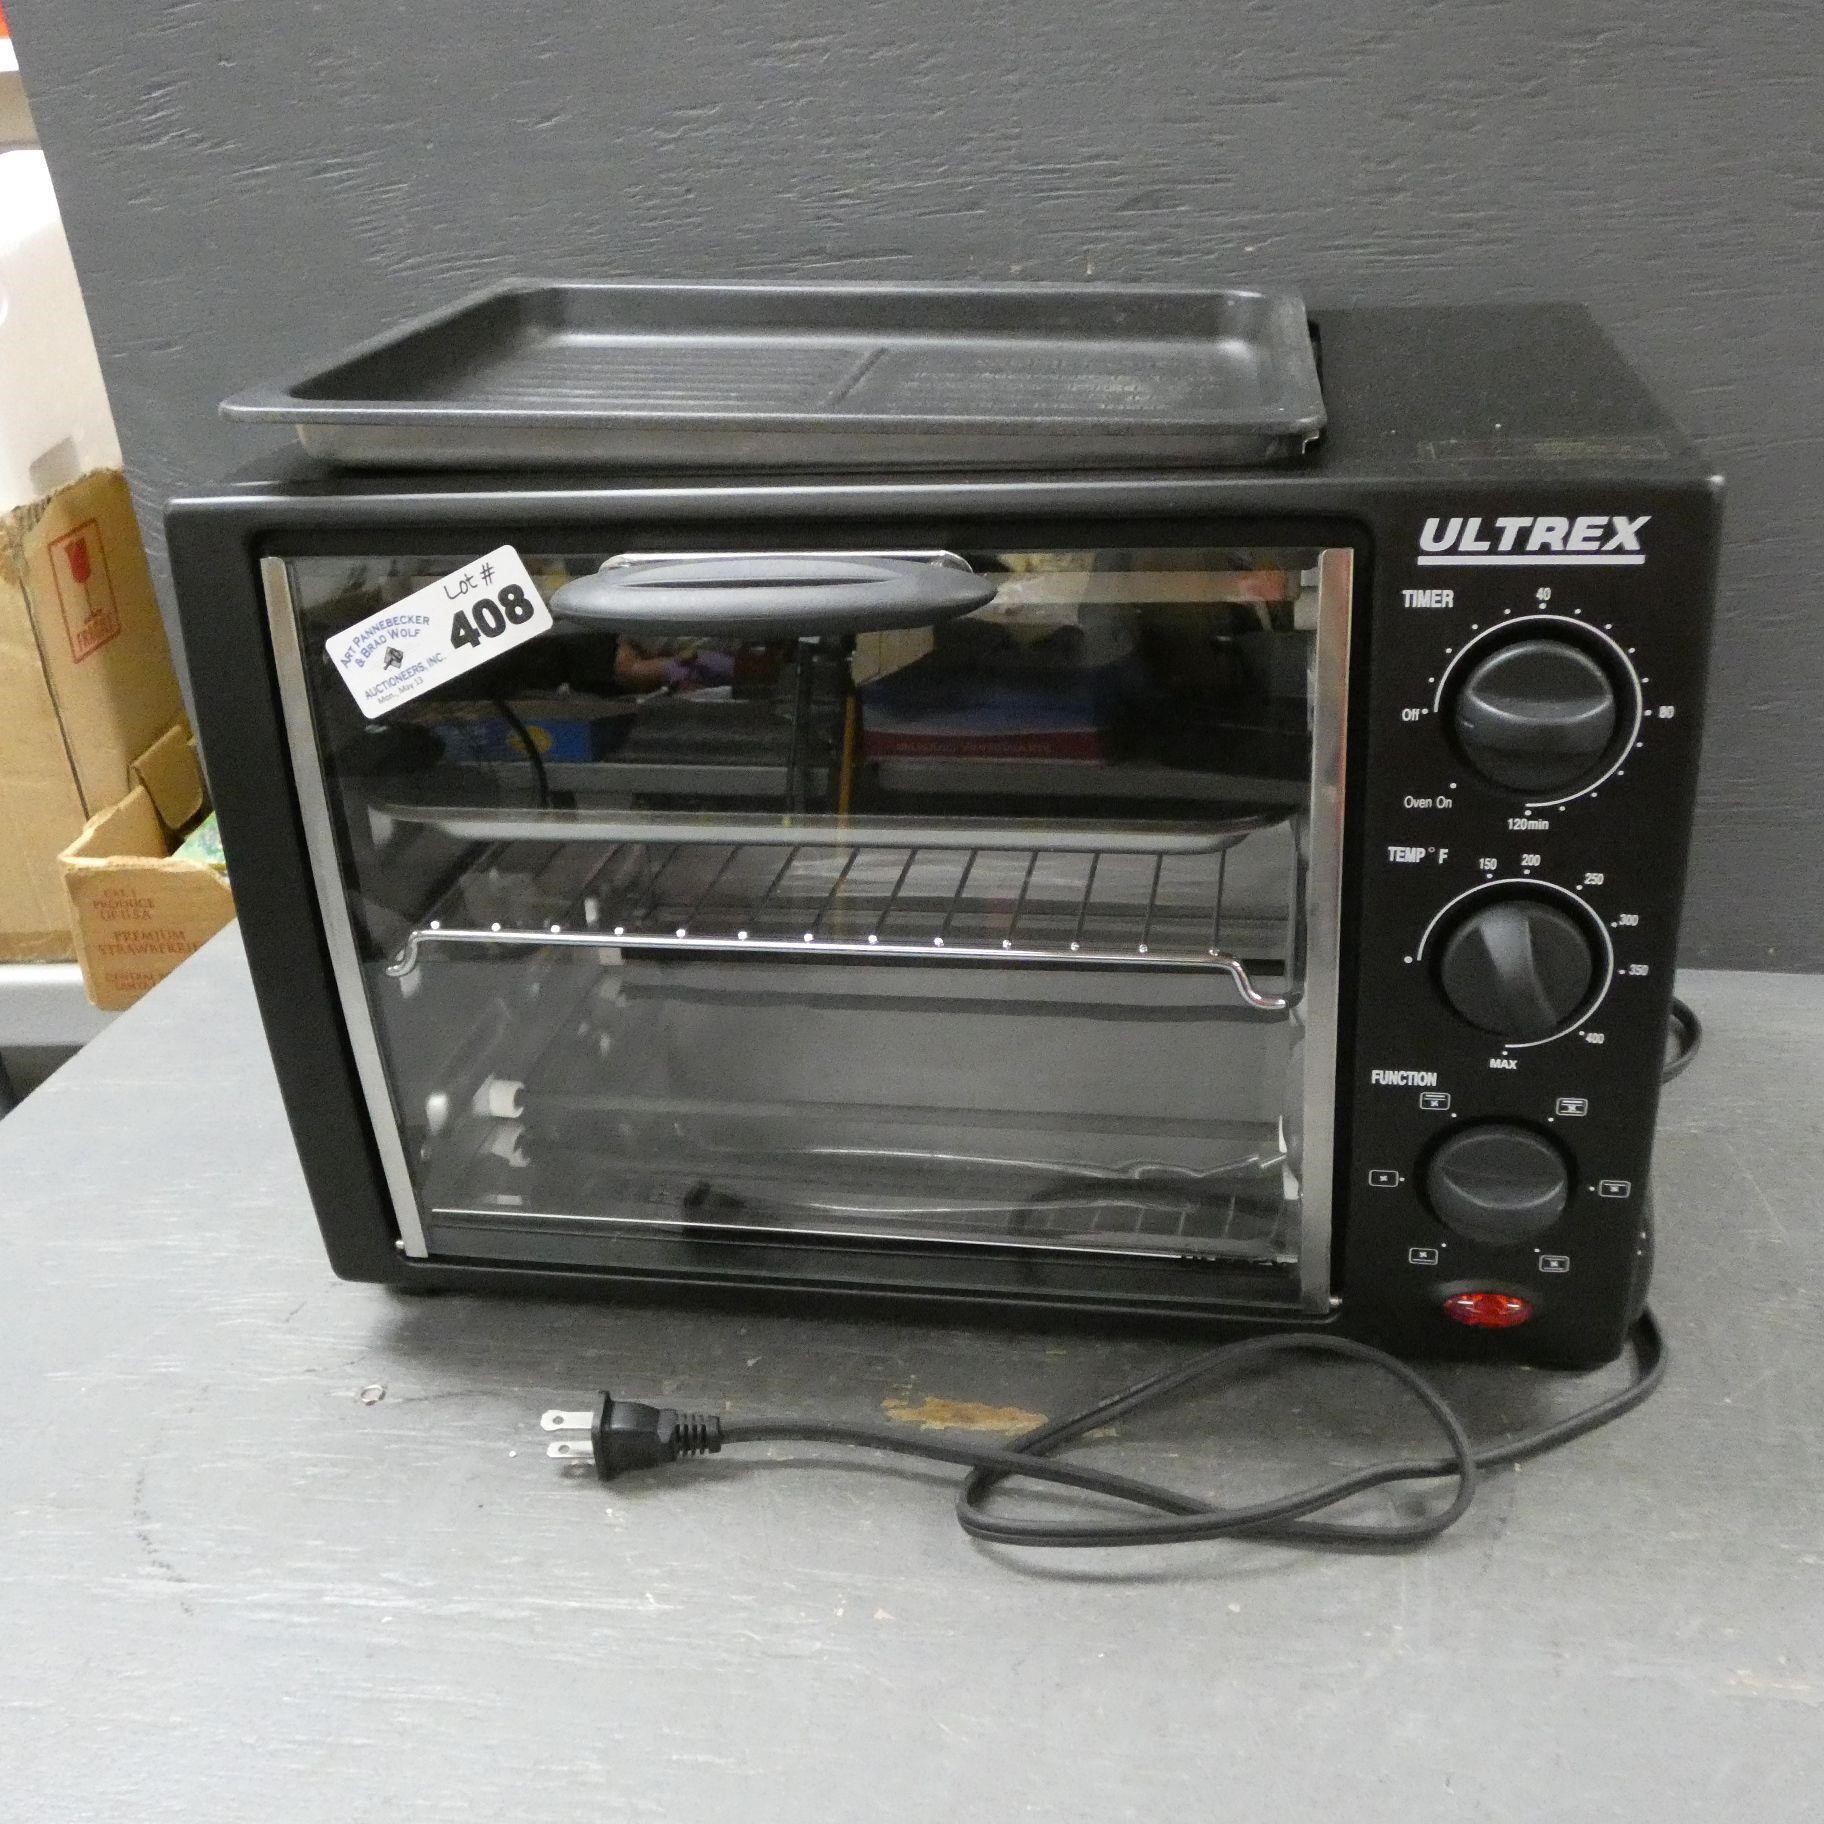 Ultrex Convection Oven